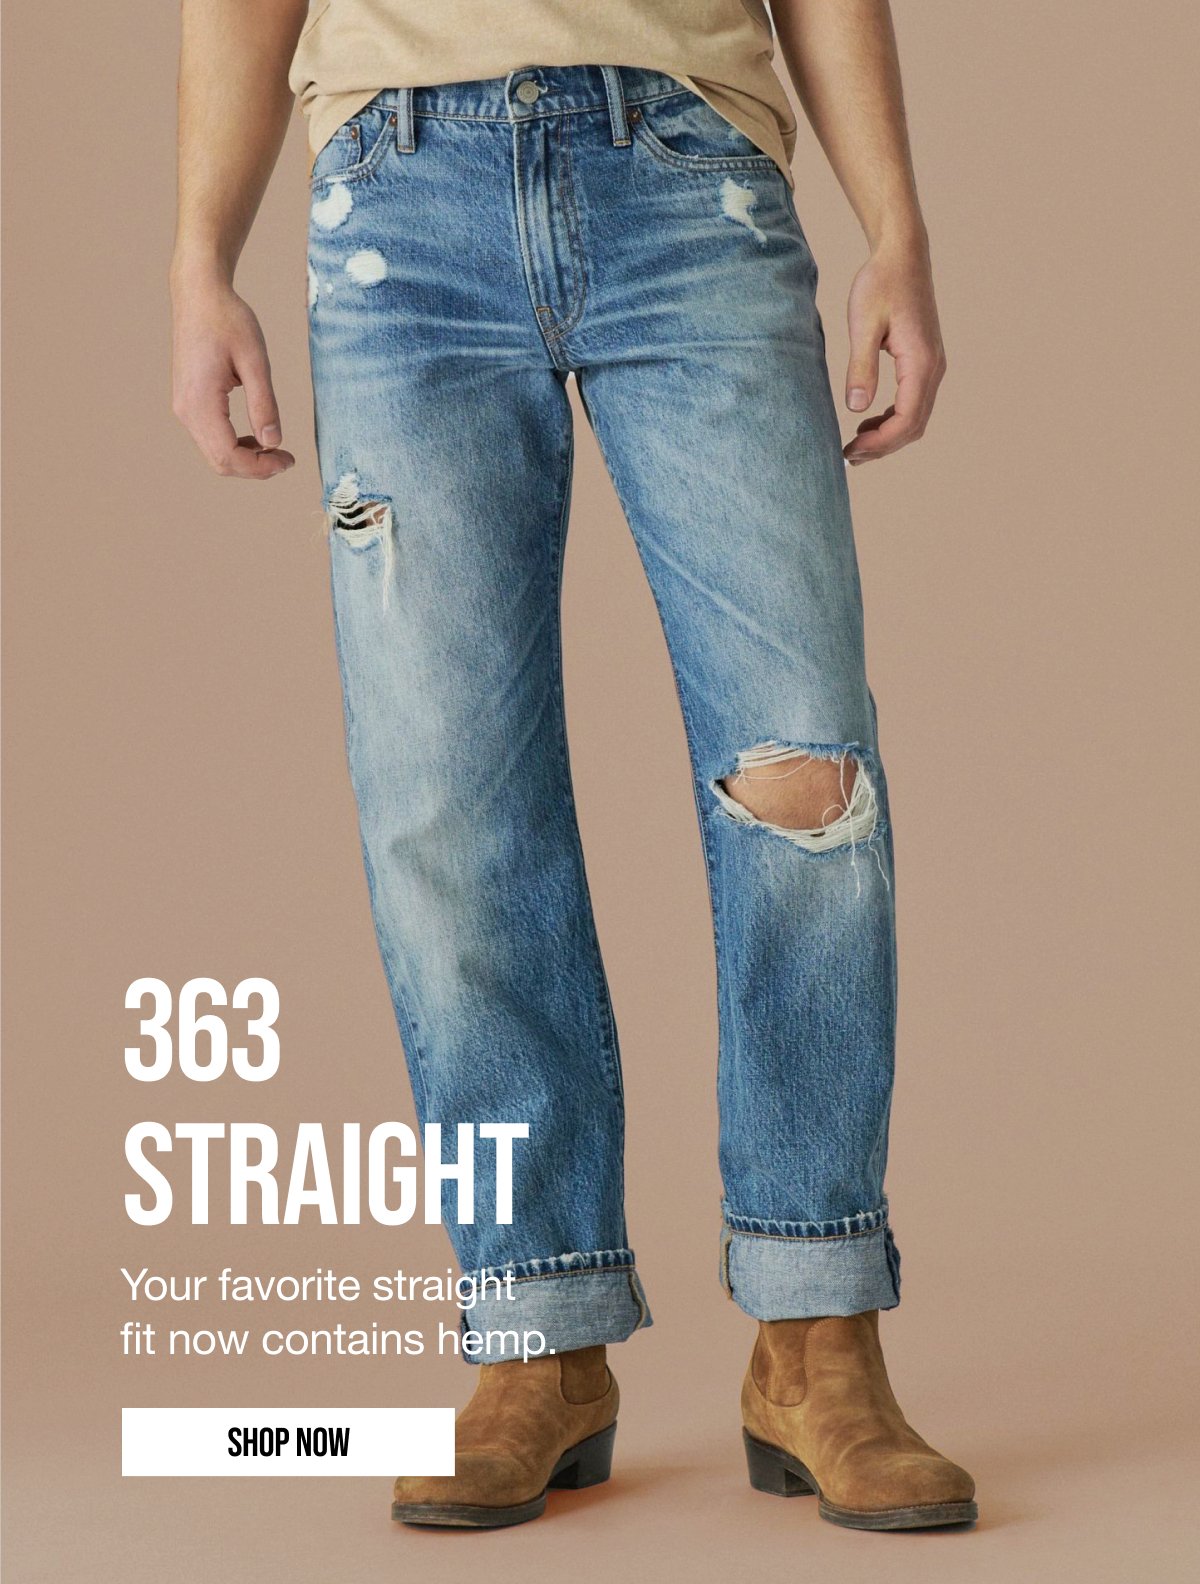 363 STRAIGHT | Your favorite straight fit now contains hemp. | SHOP NOW